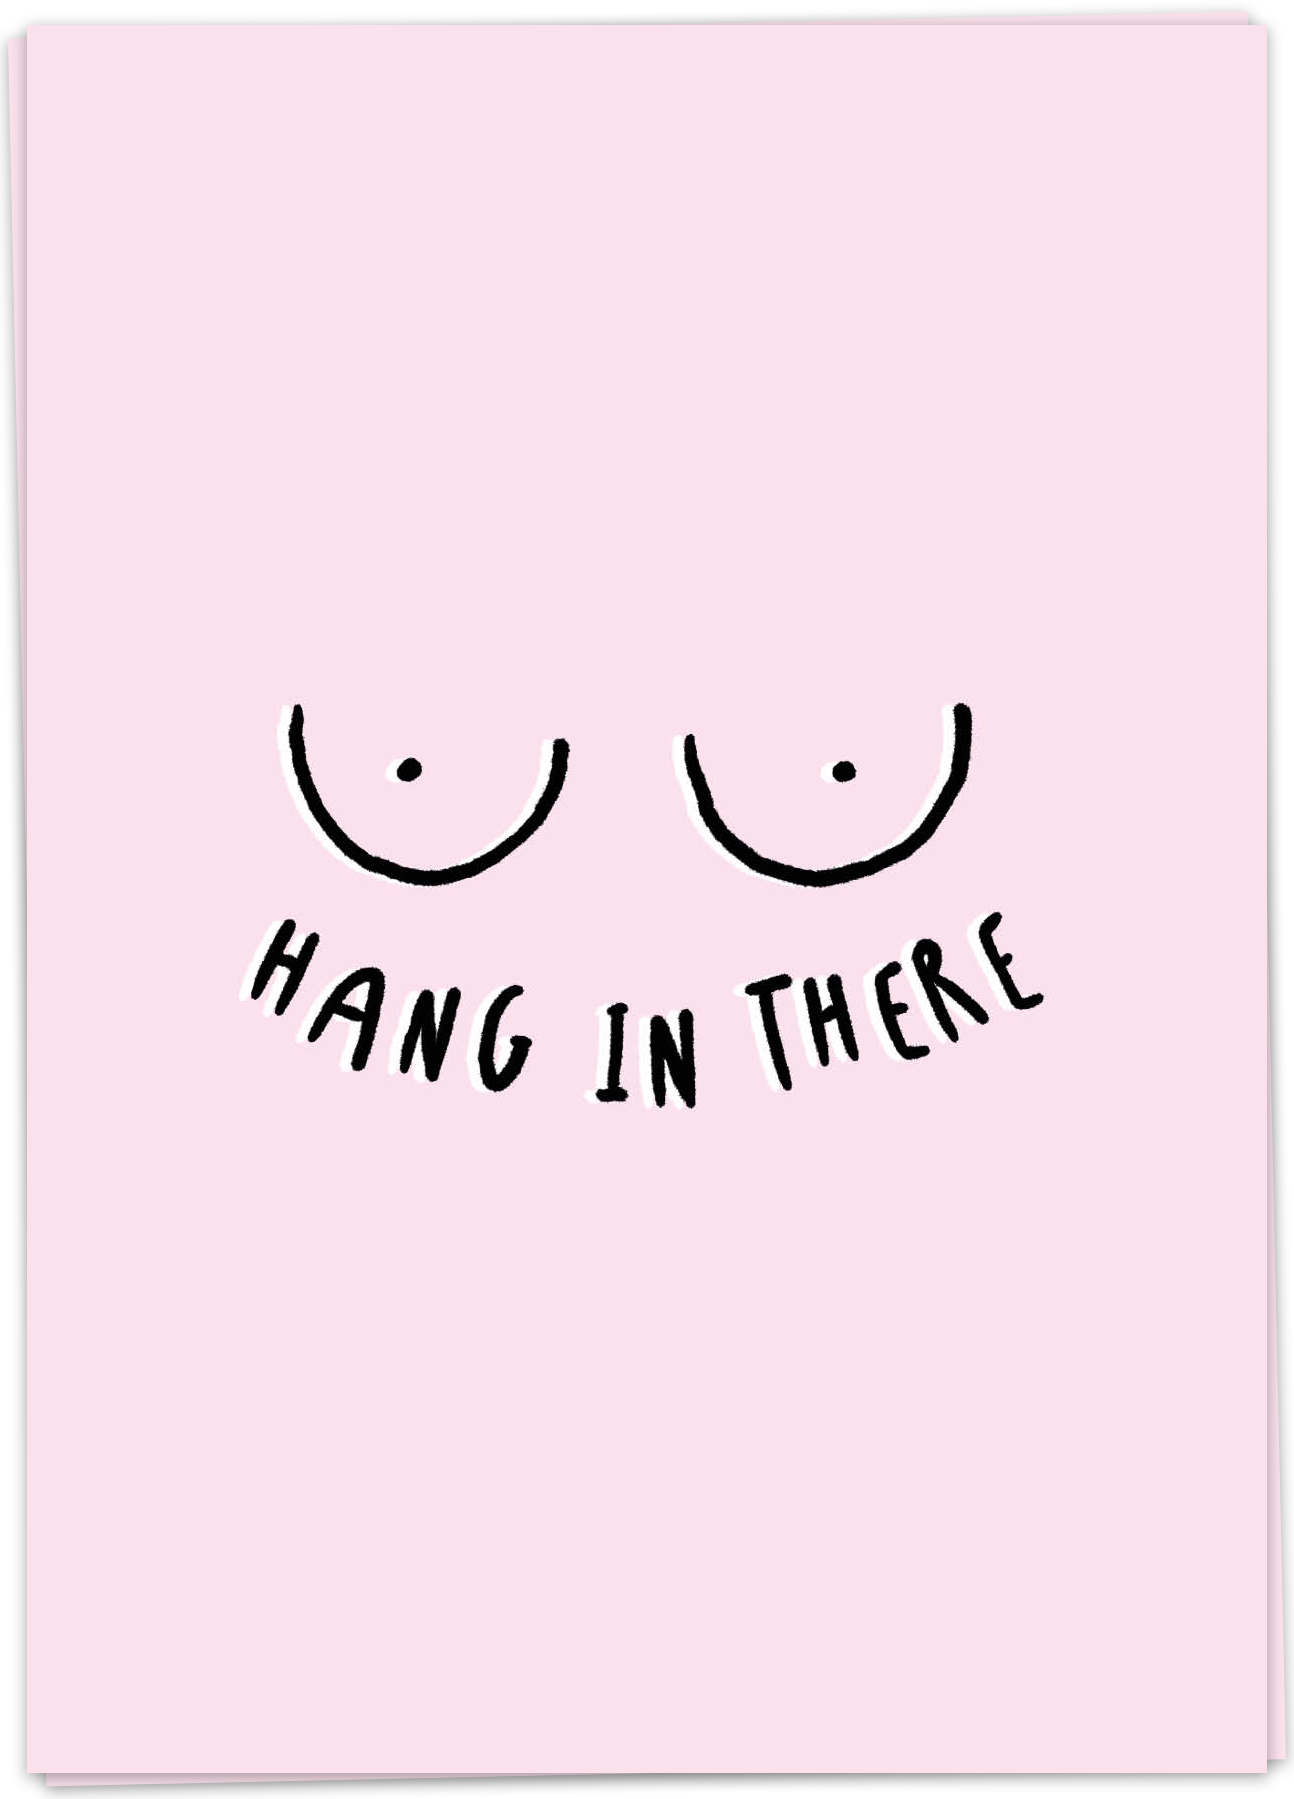 Hang in there [boobs]